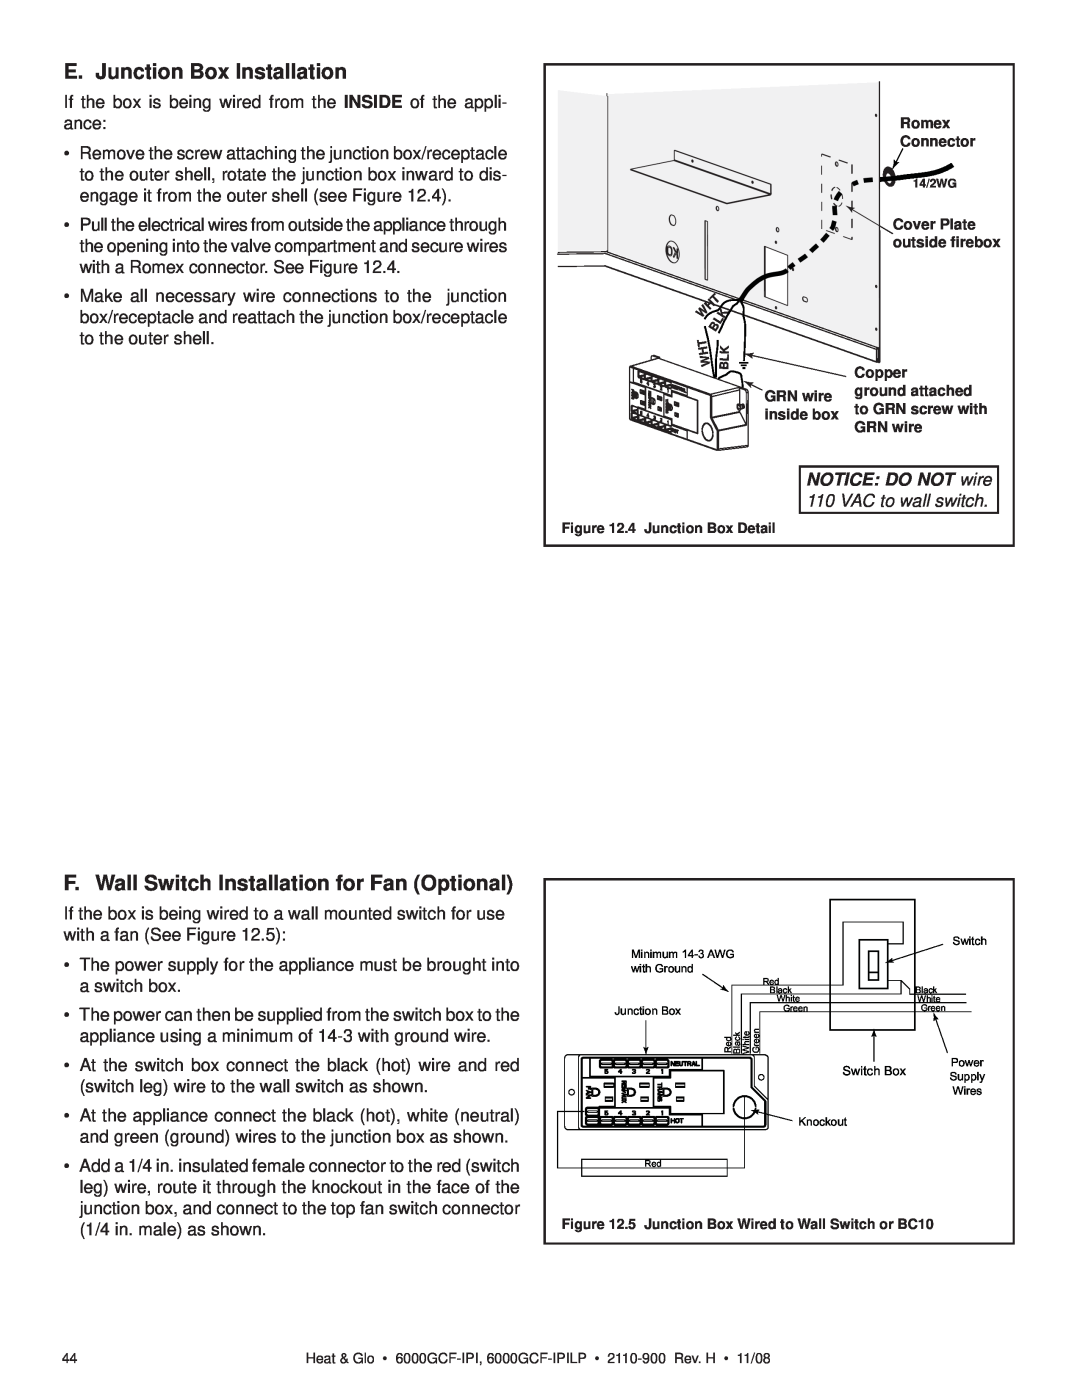 Hearth and Home Technologies 6000GCF-IPIL E. Junction Box Installation, F. Wall Switch Installation for Fan Optional 